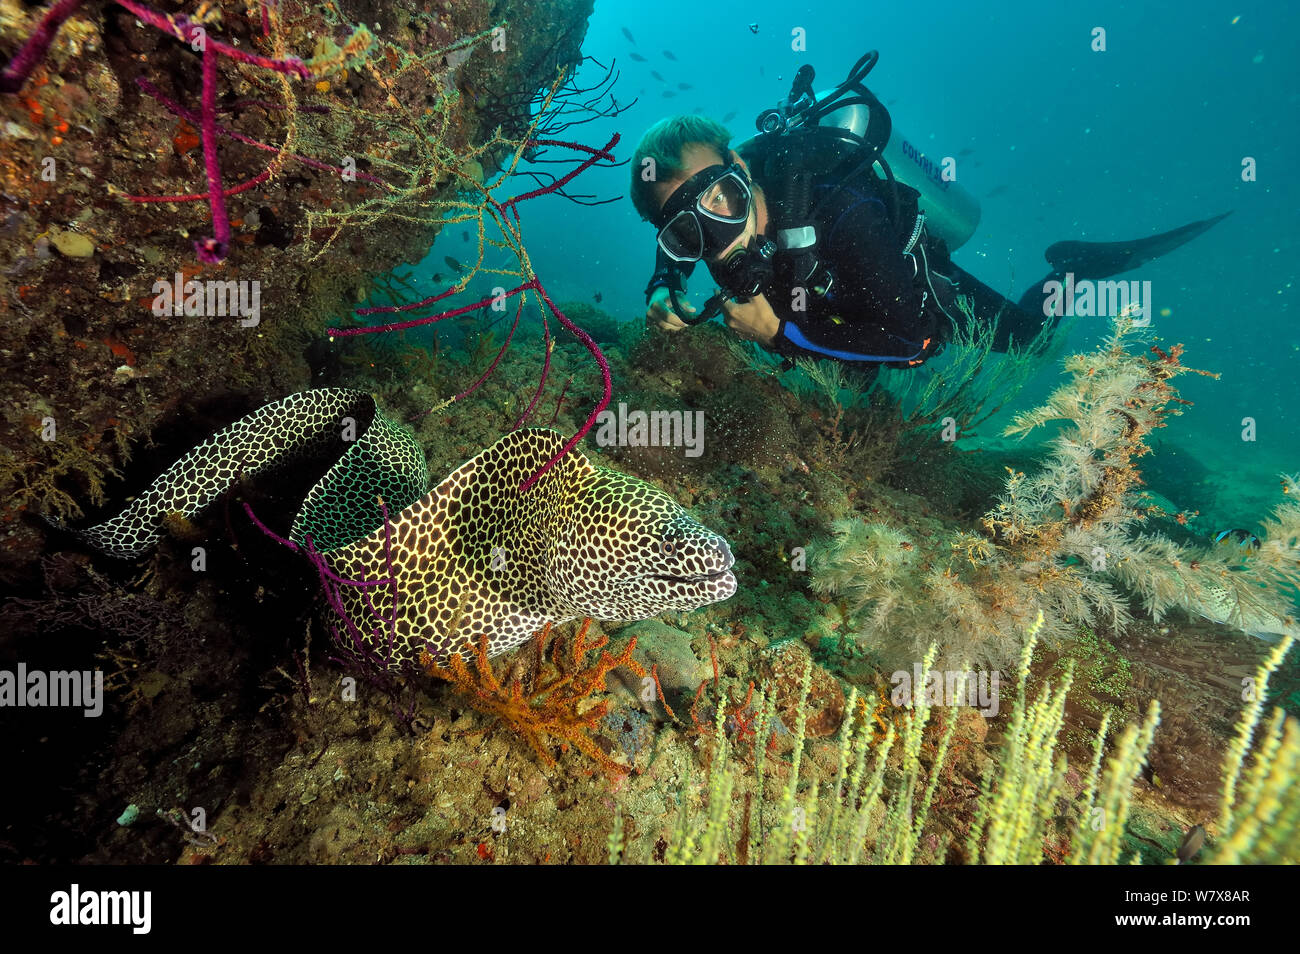 Diver with a honeycomb moray (Gymnothorax favagineus) out of its hole, Daymaniyat islands, Oman. Gulf of Oman. October 2010. Stock Photo